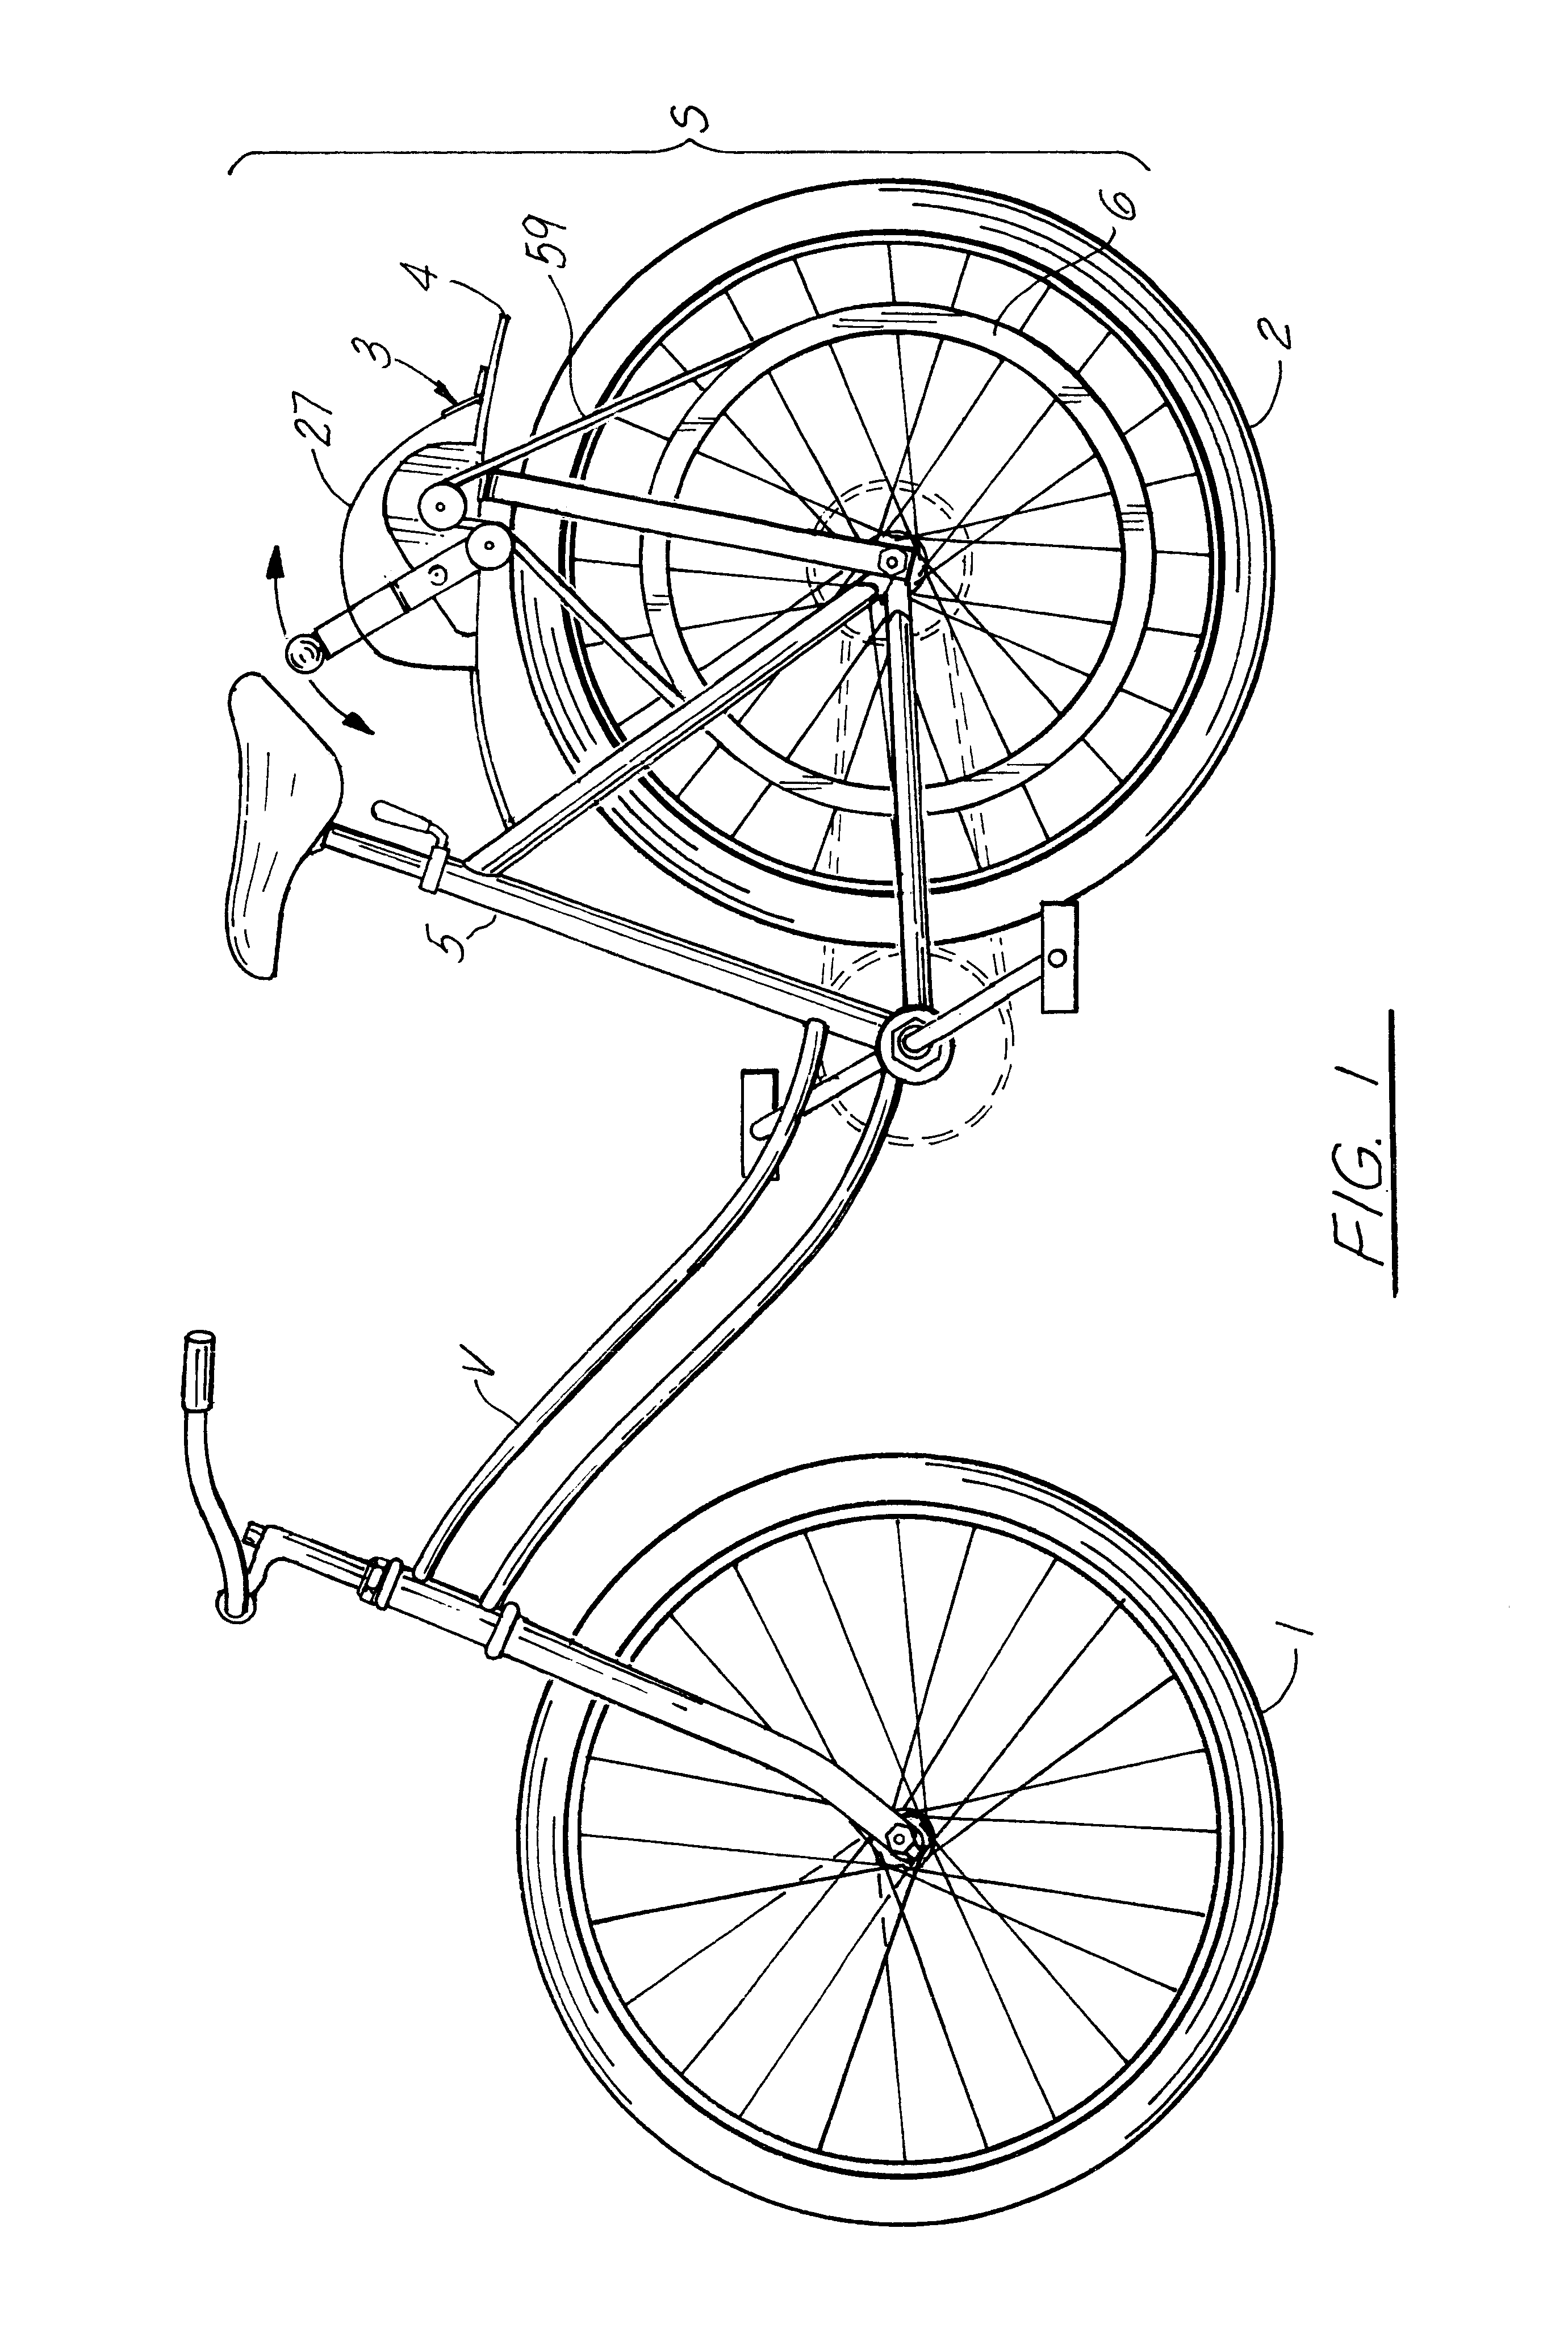 Spoke mounted drive hub for a cycle and system for propulsion therefore